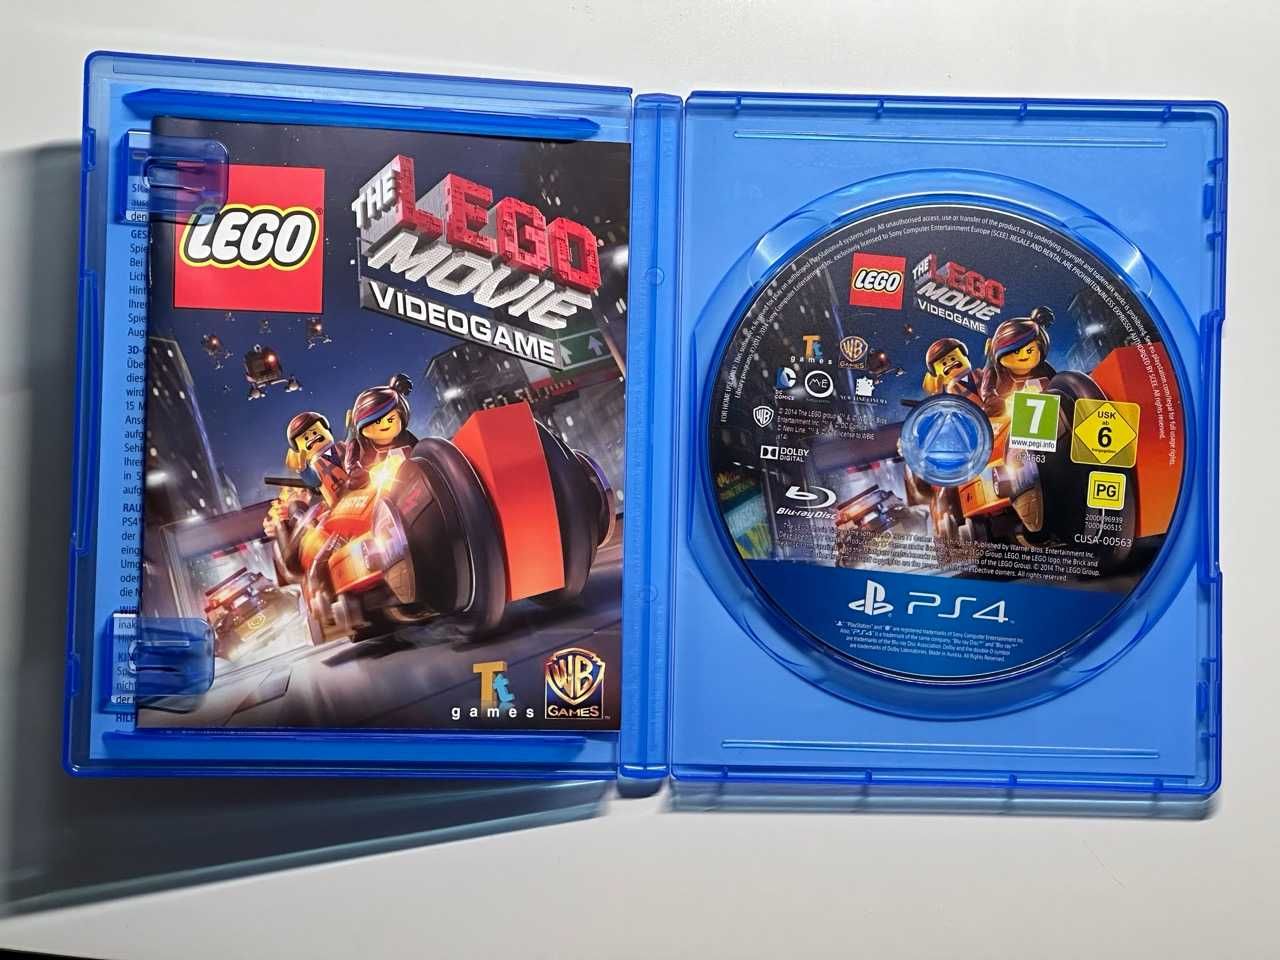 The lego moview videogame PS4